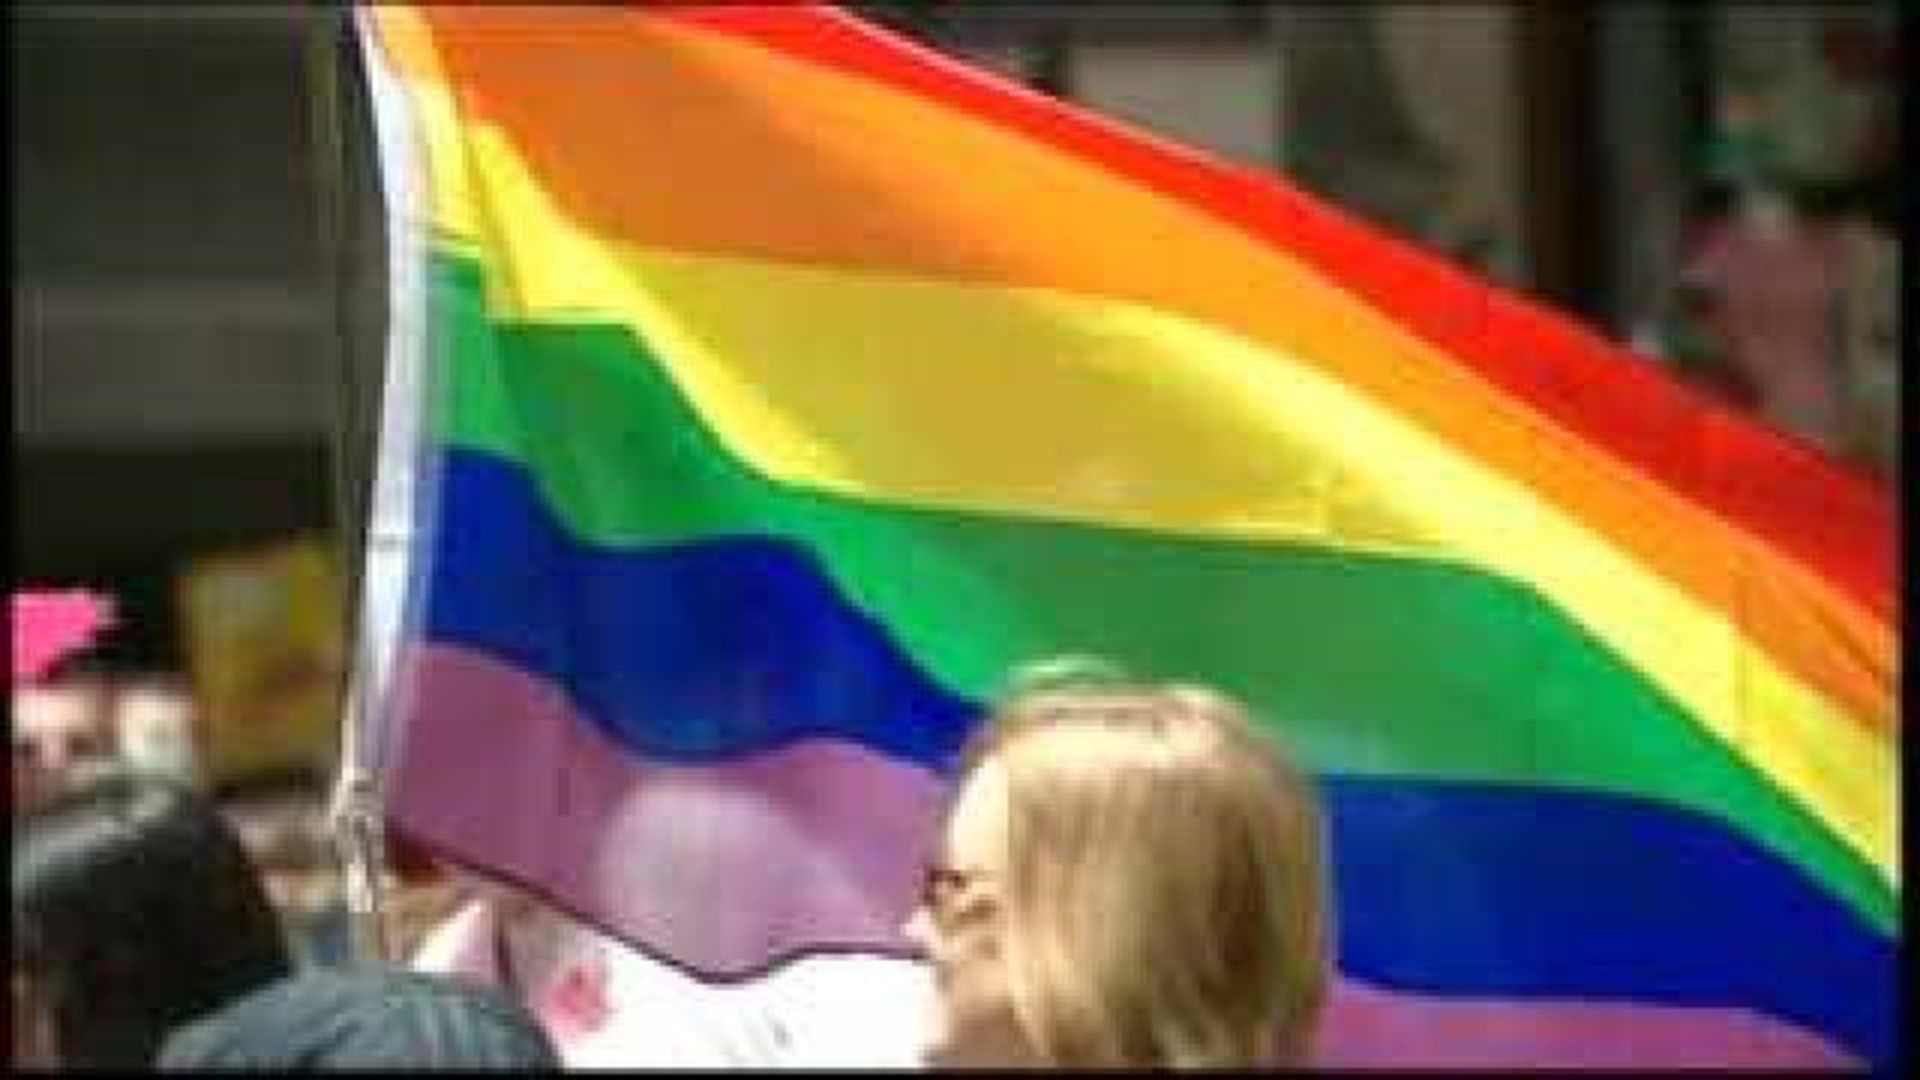 Marking the 4-year anniversary of same-sex marriage legalization in Iowa